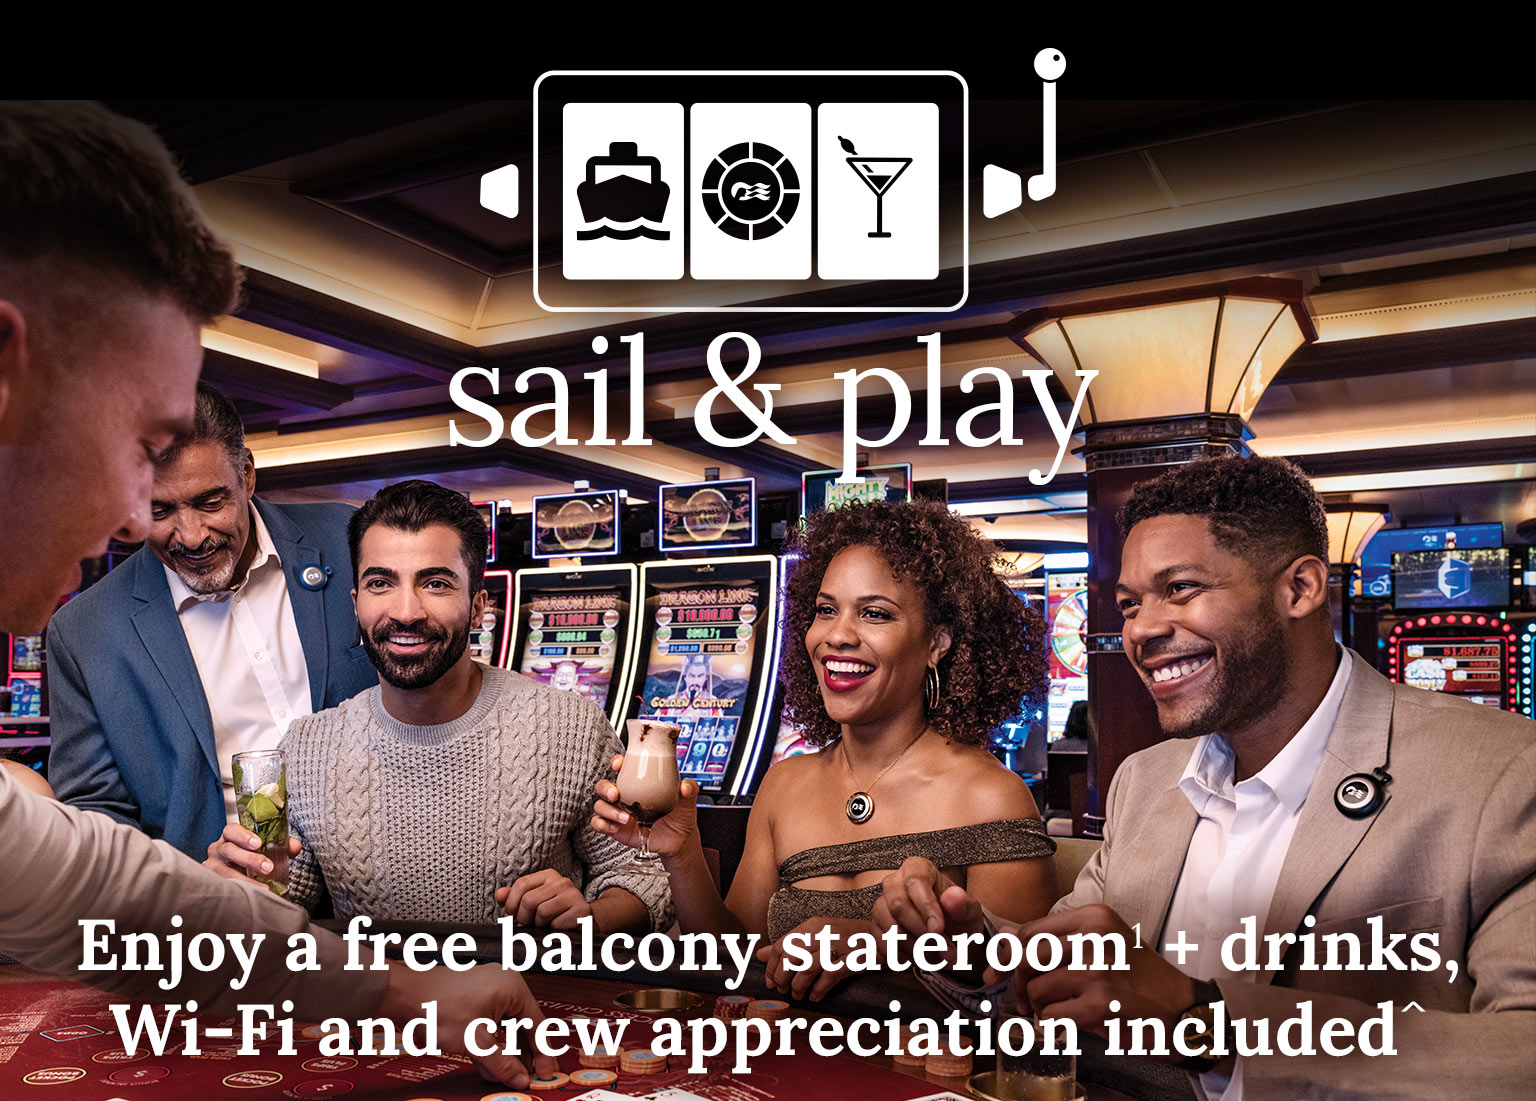 enjoy a free balcony stateroom + drinks, Wi-Fi and crew appreciation included. Click here to book. 